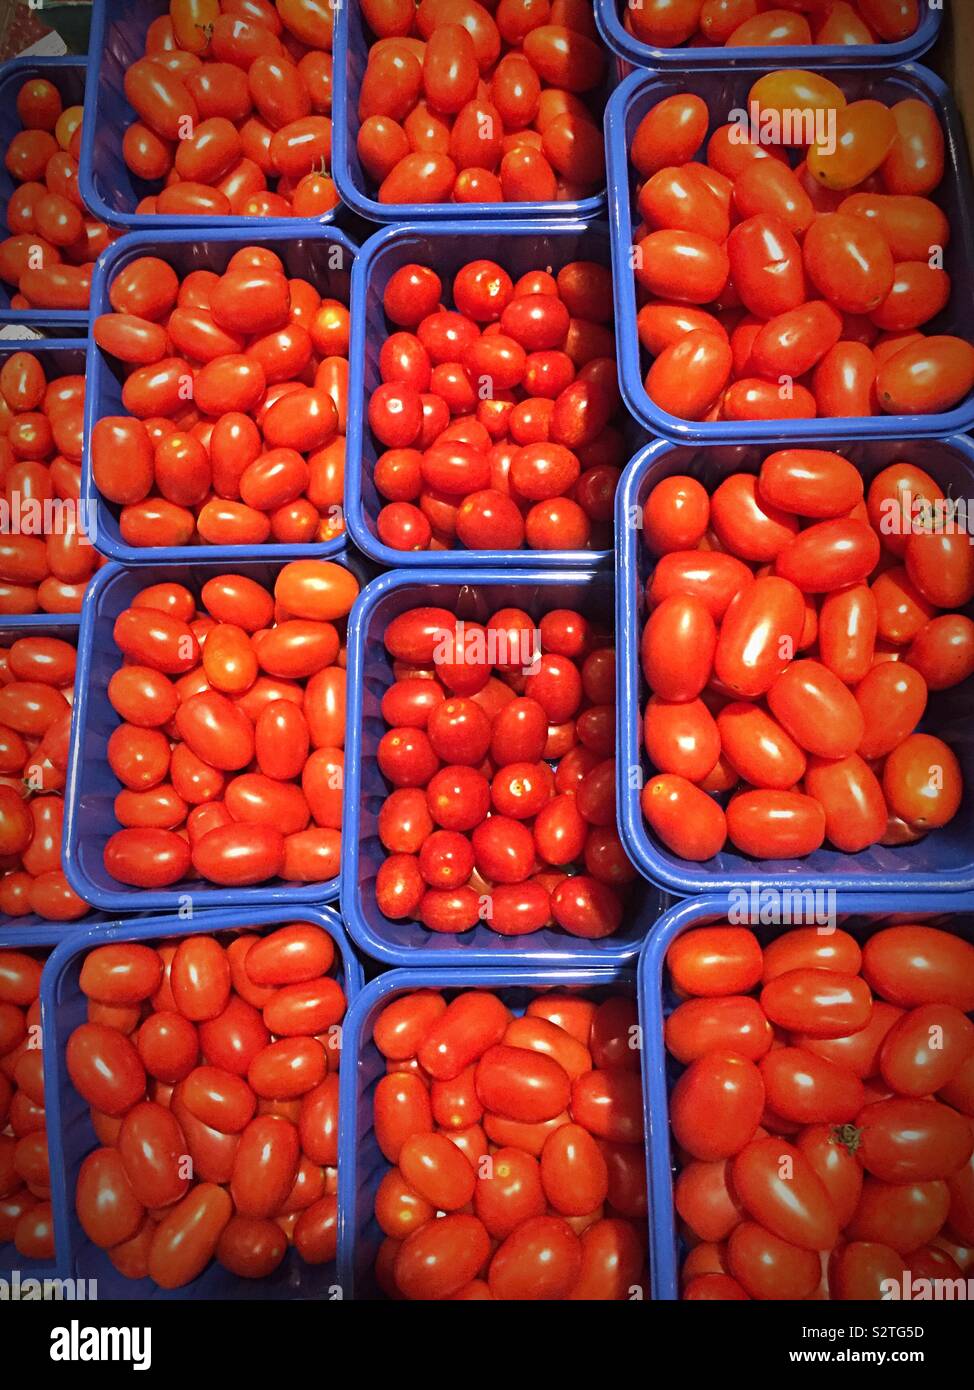 Red grape tomatoes bins for sale in a grocery store produce aisle, USA Stock Photo